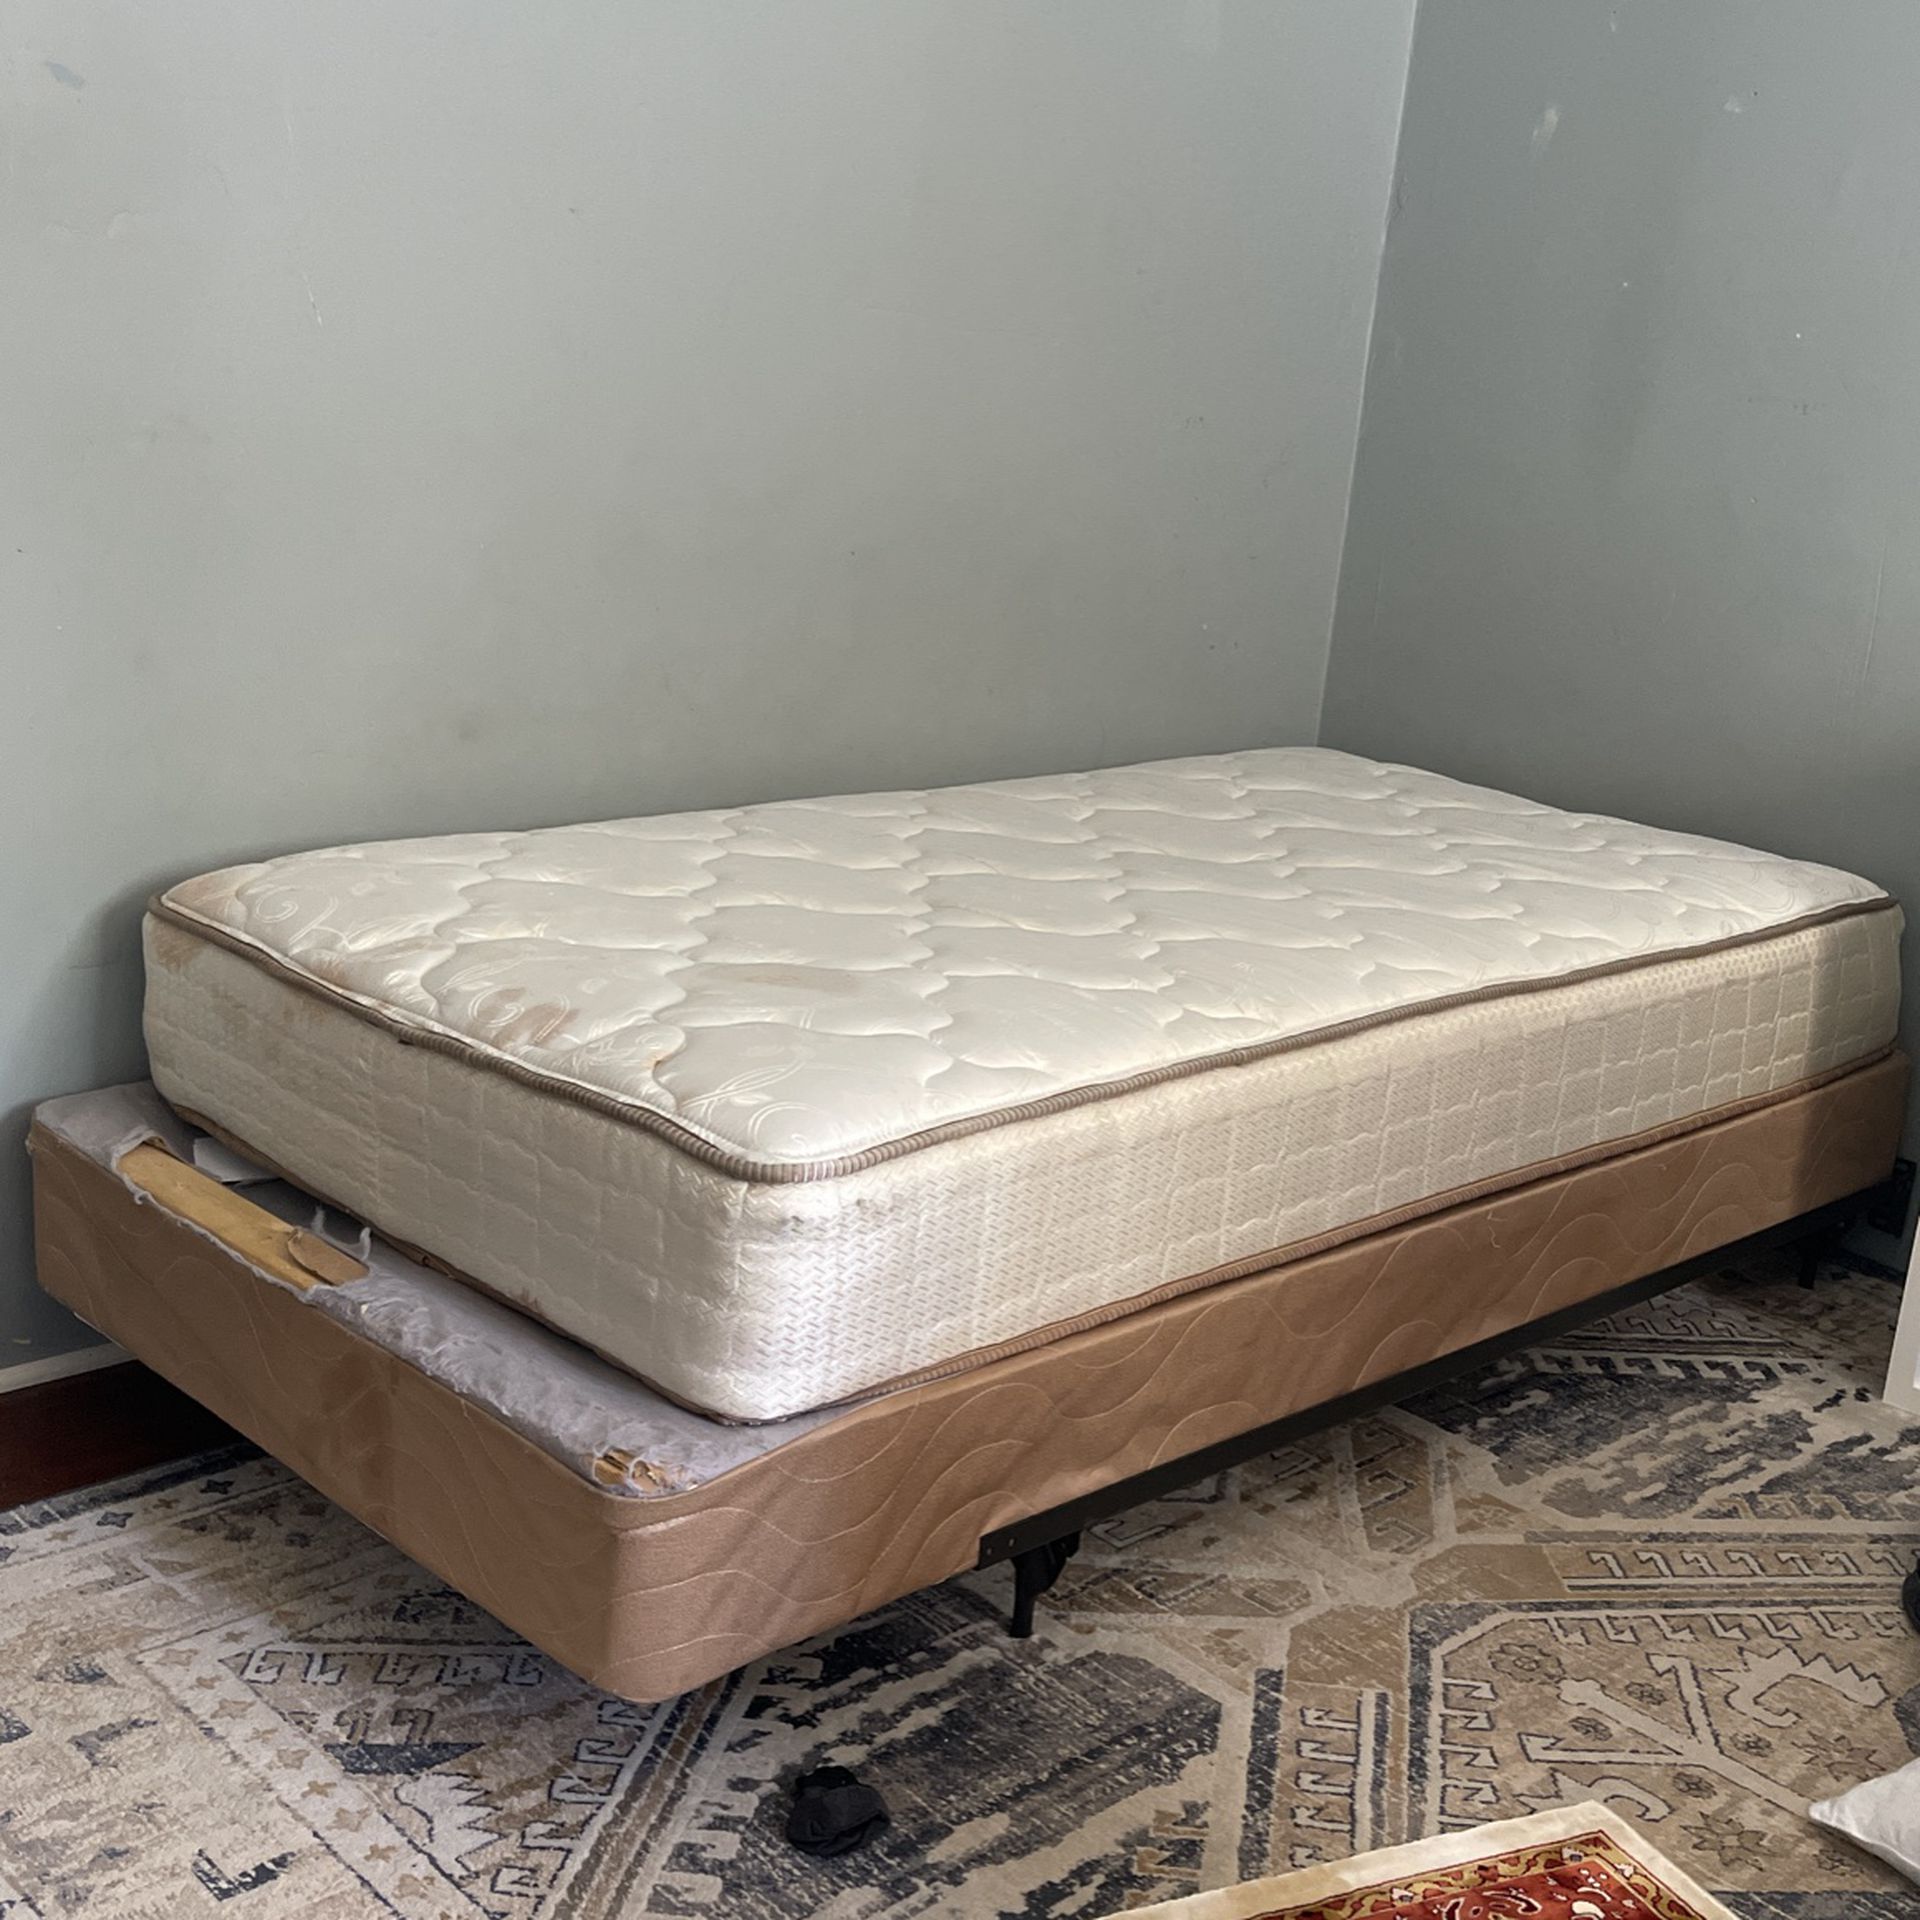  twin Bed, Spring Box, And Metal Platform